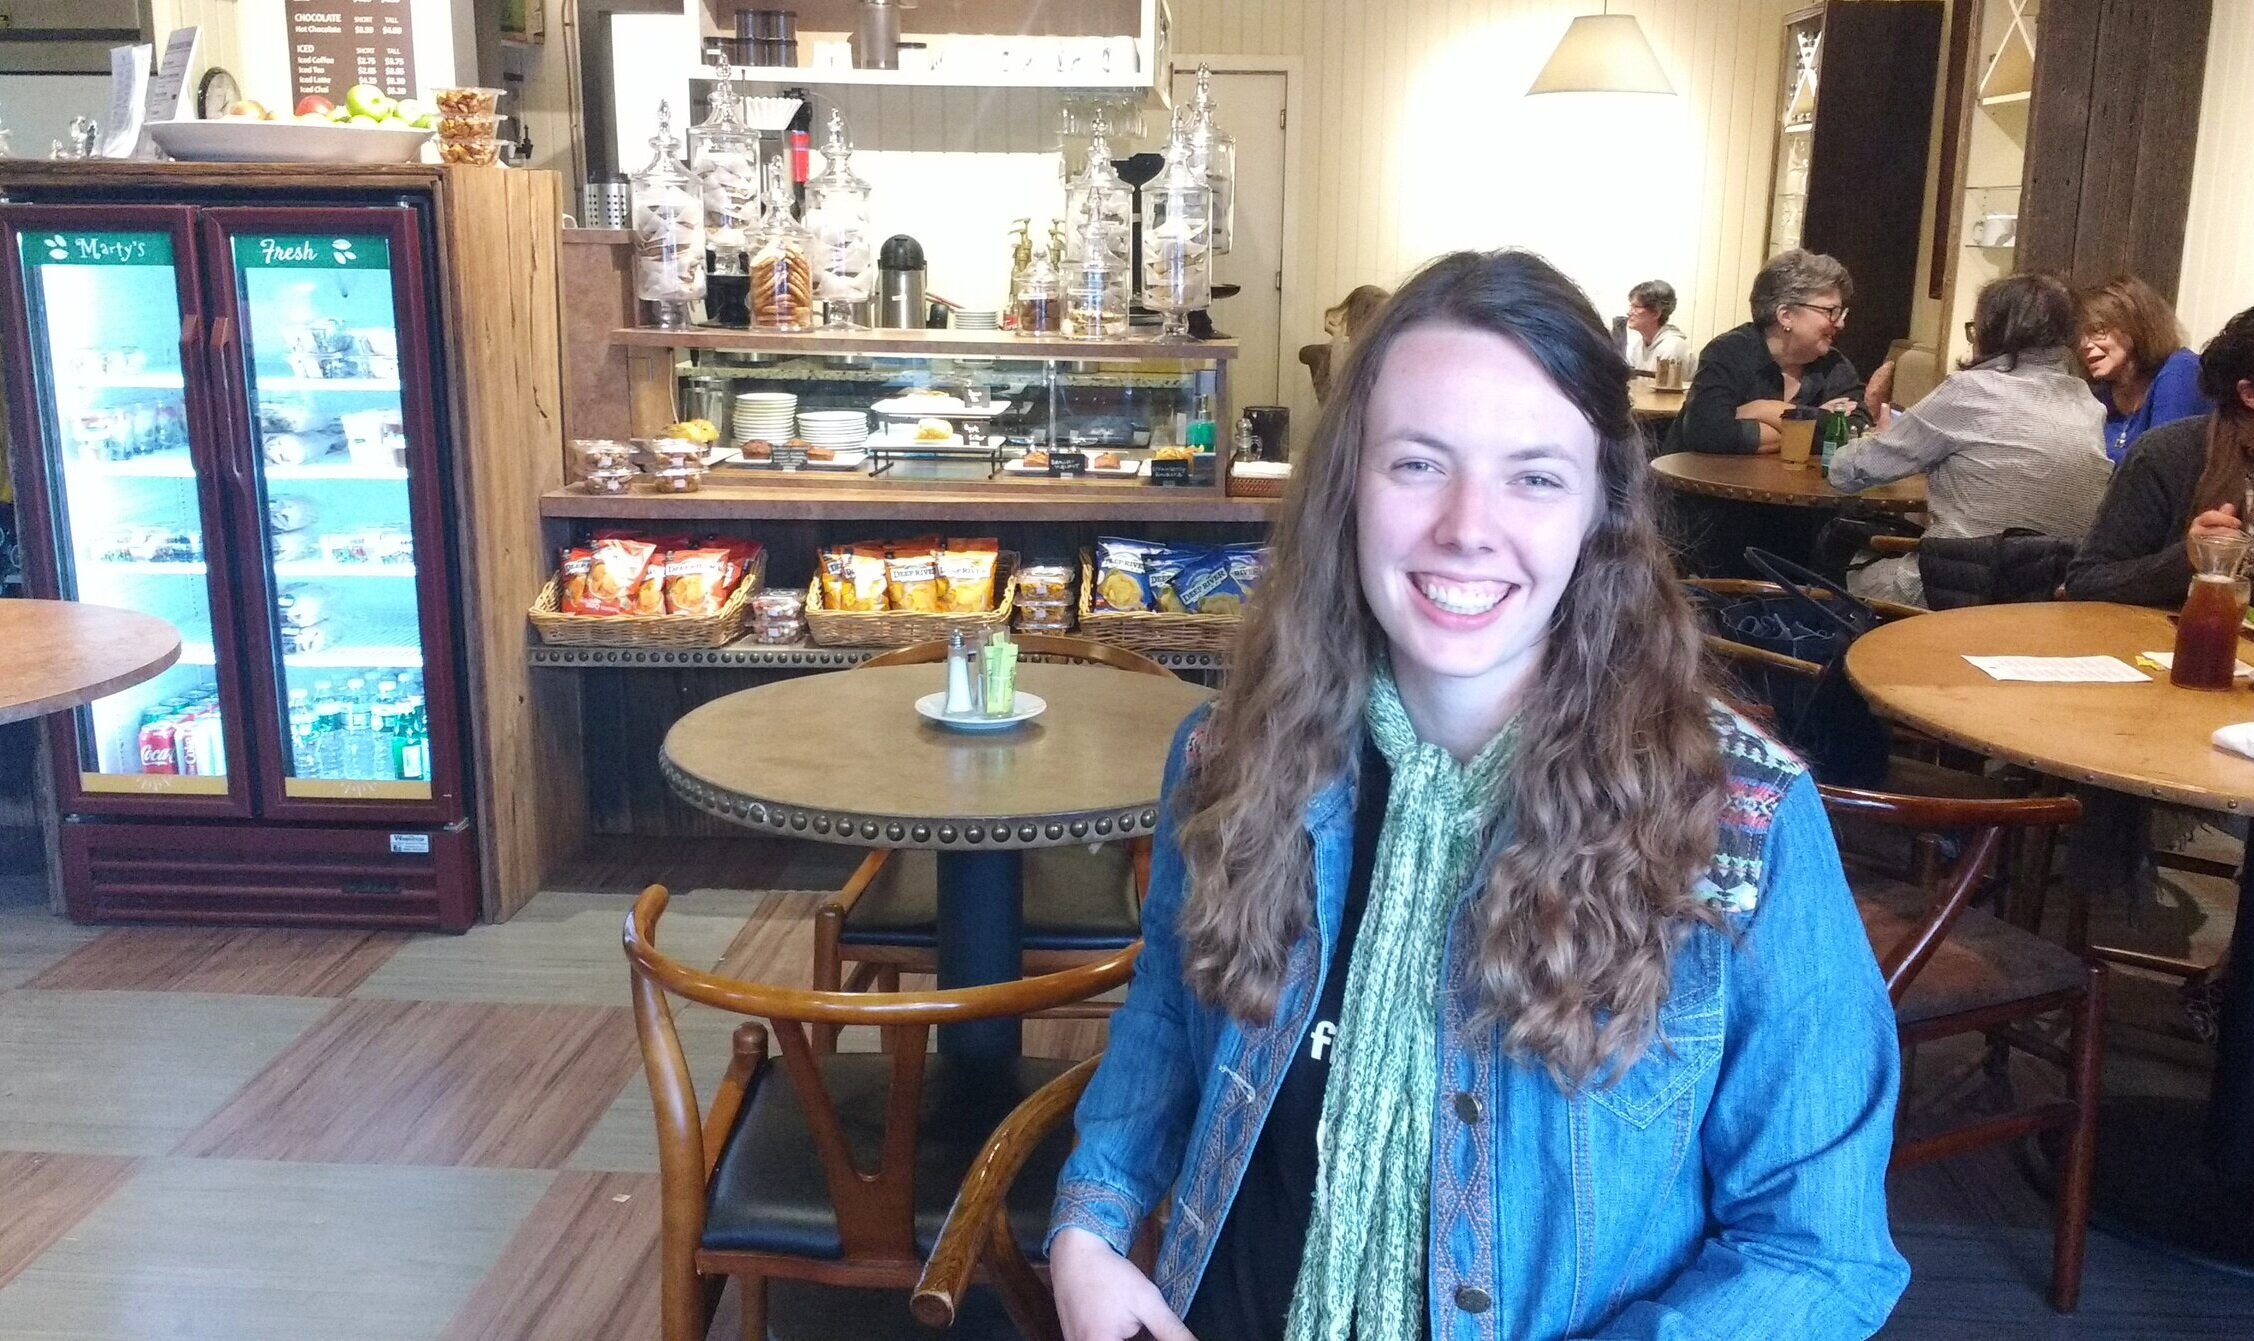 Me being super cool in my “Gilmore Girls” outfit at the café in Washington Depot, CT.